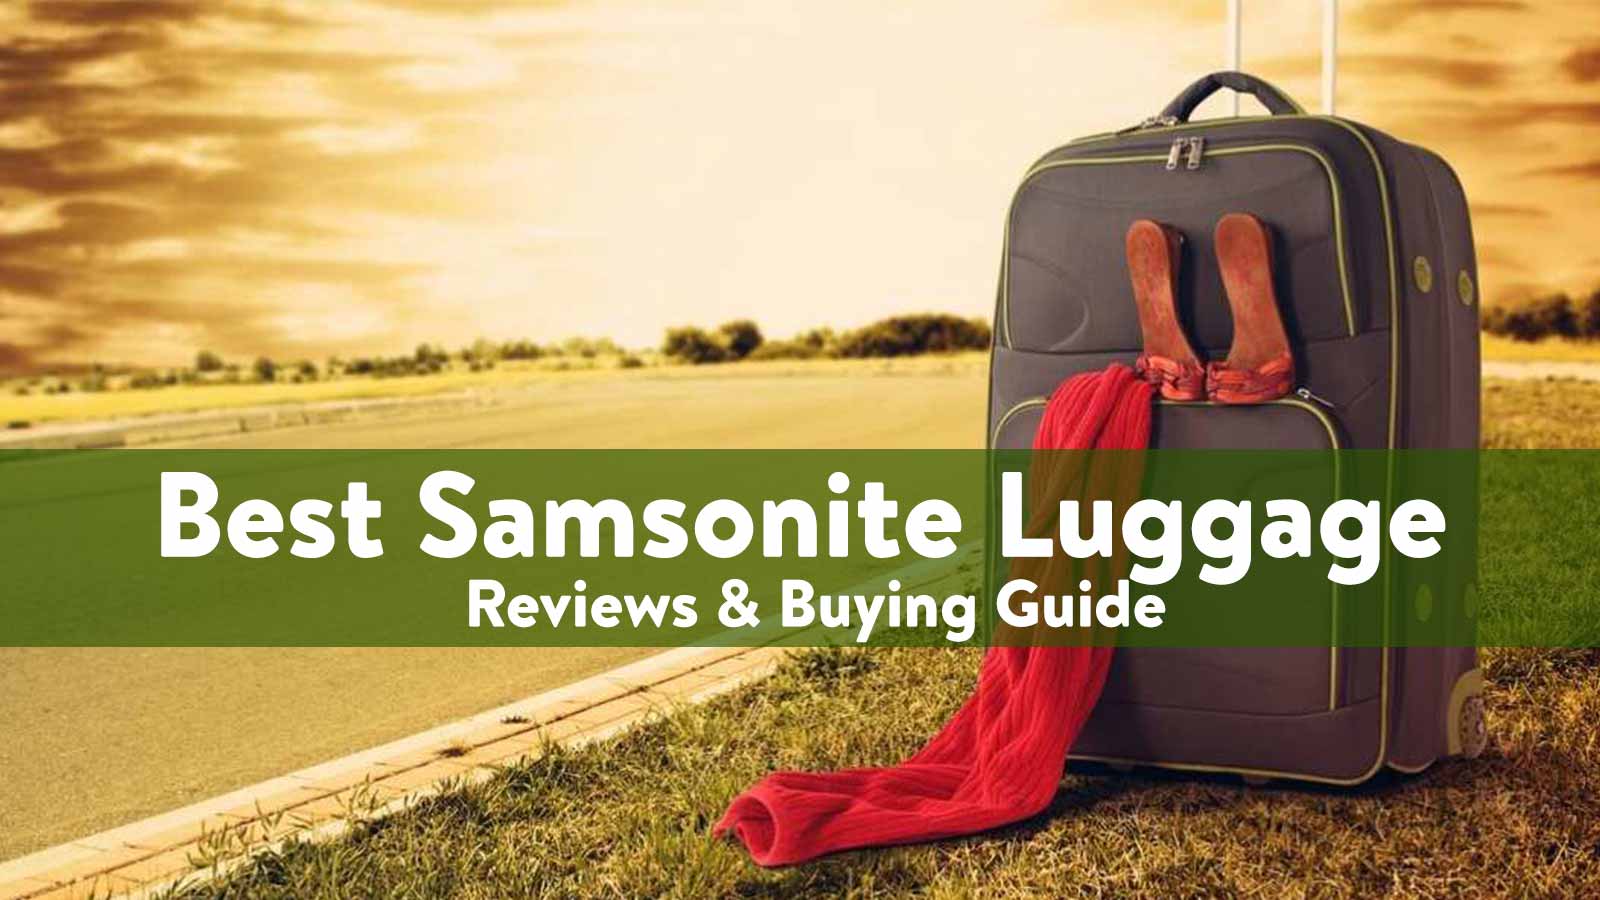 Best Samsonite Luggage Res Of Buying Guide